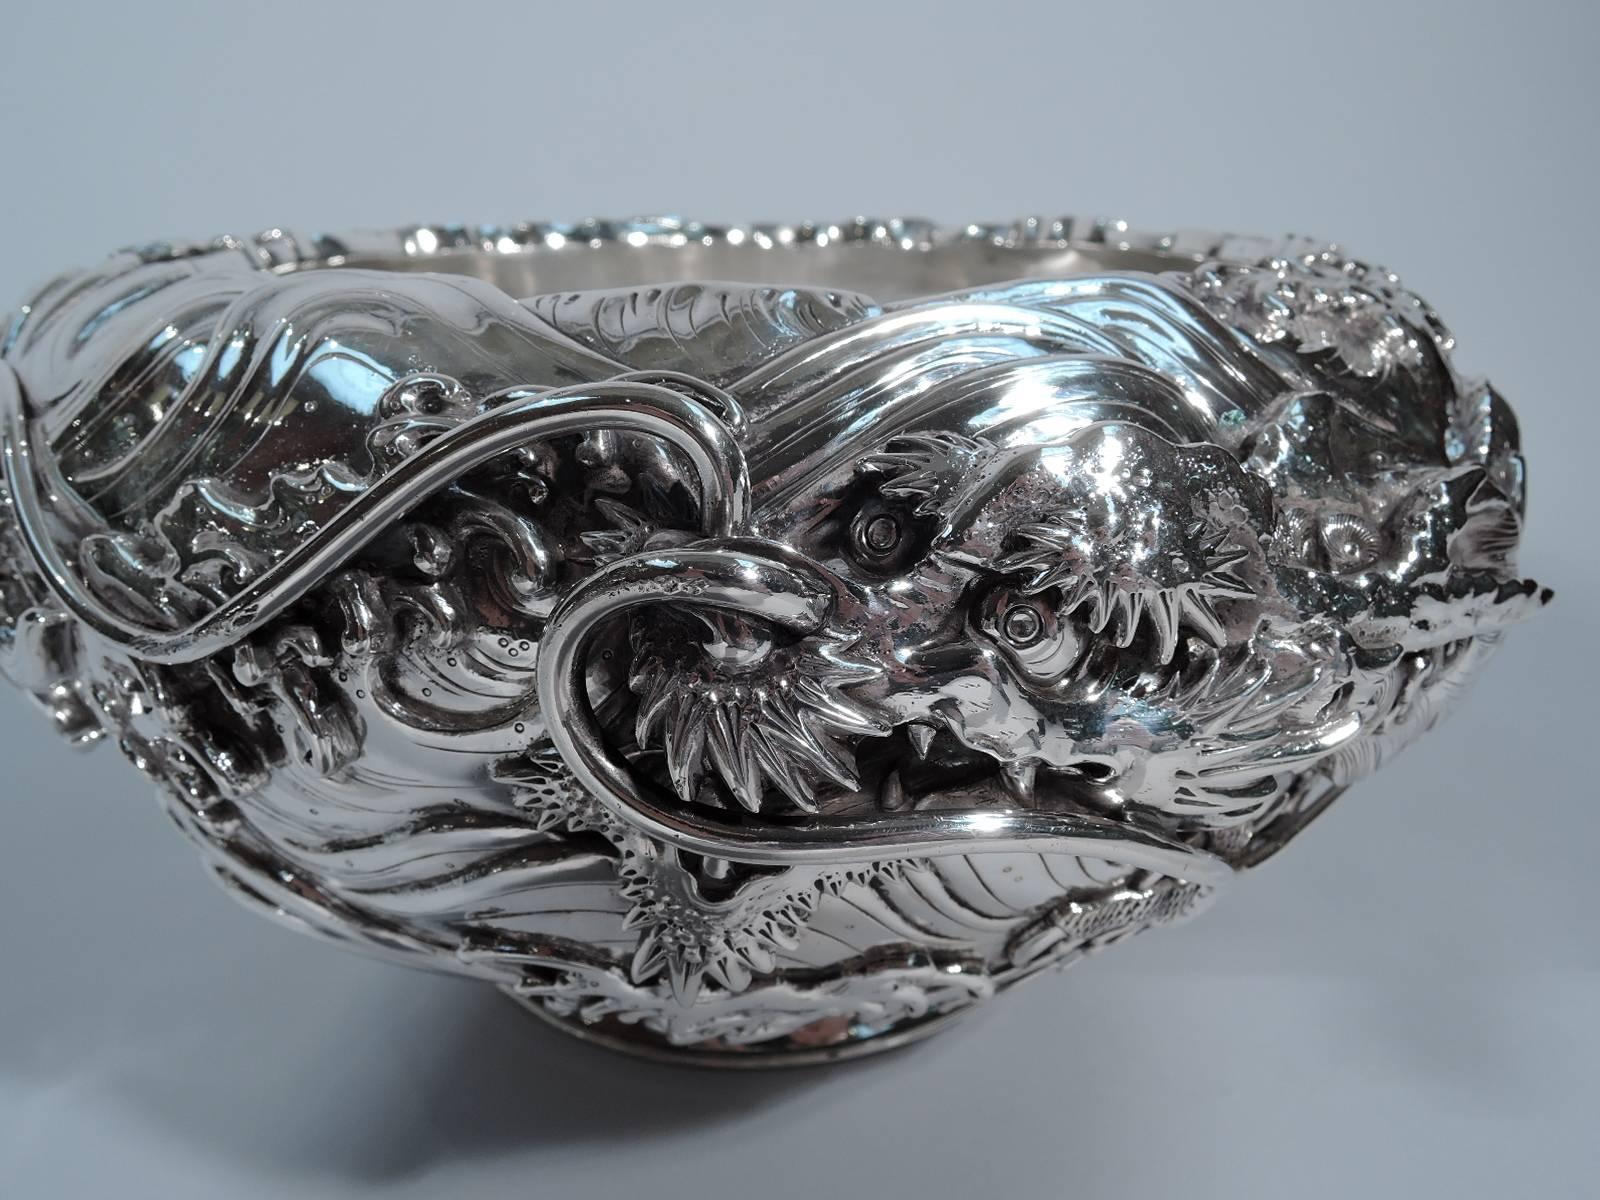 Fantastic Japanese silver bowl with wraparound dragon, circa 1890. Curved sides and collar base. Sculptural relief ornament in form of scaly dragon slithering through wavy water. Details include whiskered snout and swooshing tail fin. Interior